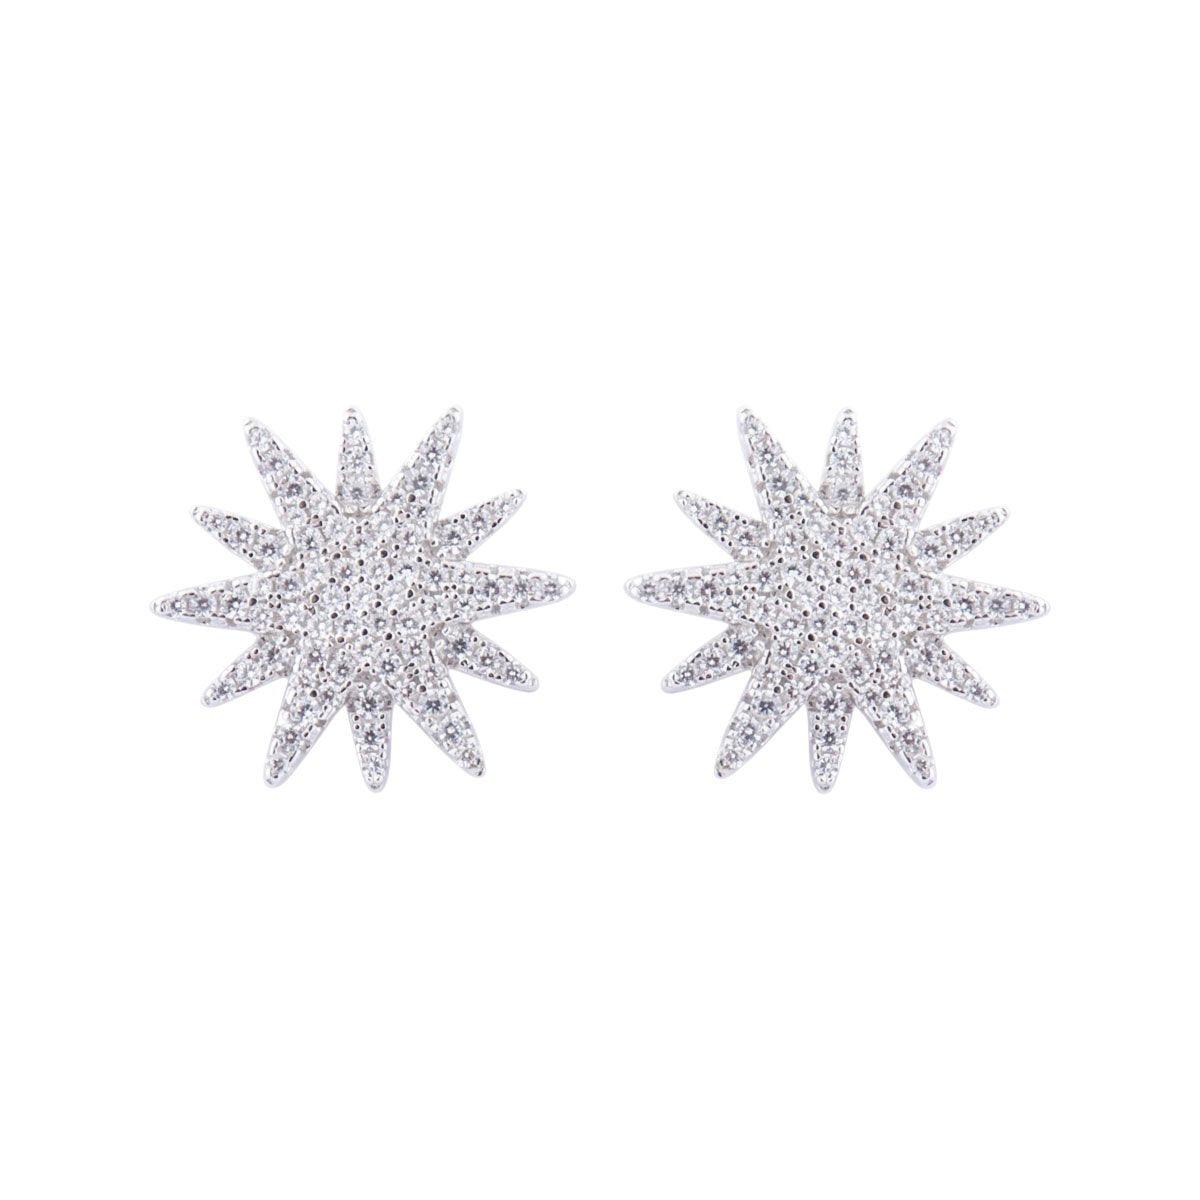 Earring E1406 - 925 Sterling Silver - Asfour Crystal